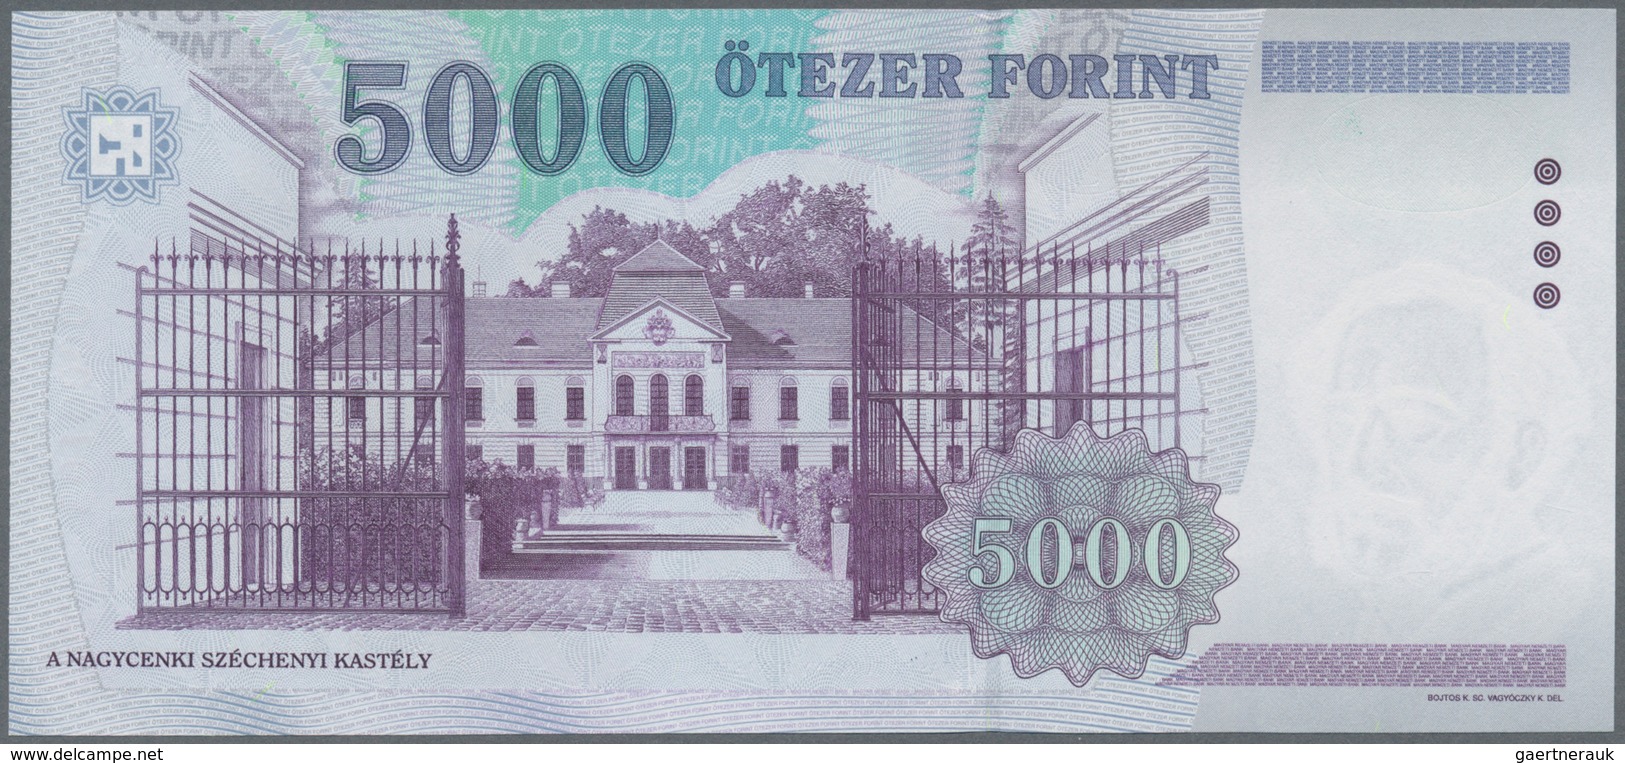 01711 Hungary / Ungarn: 5000 Forint 1999, P.182 With Very Low Serail Number BF 0000103 In UNC Condition - Hungría